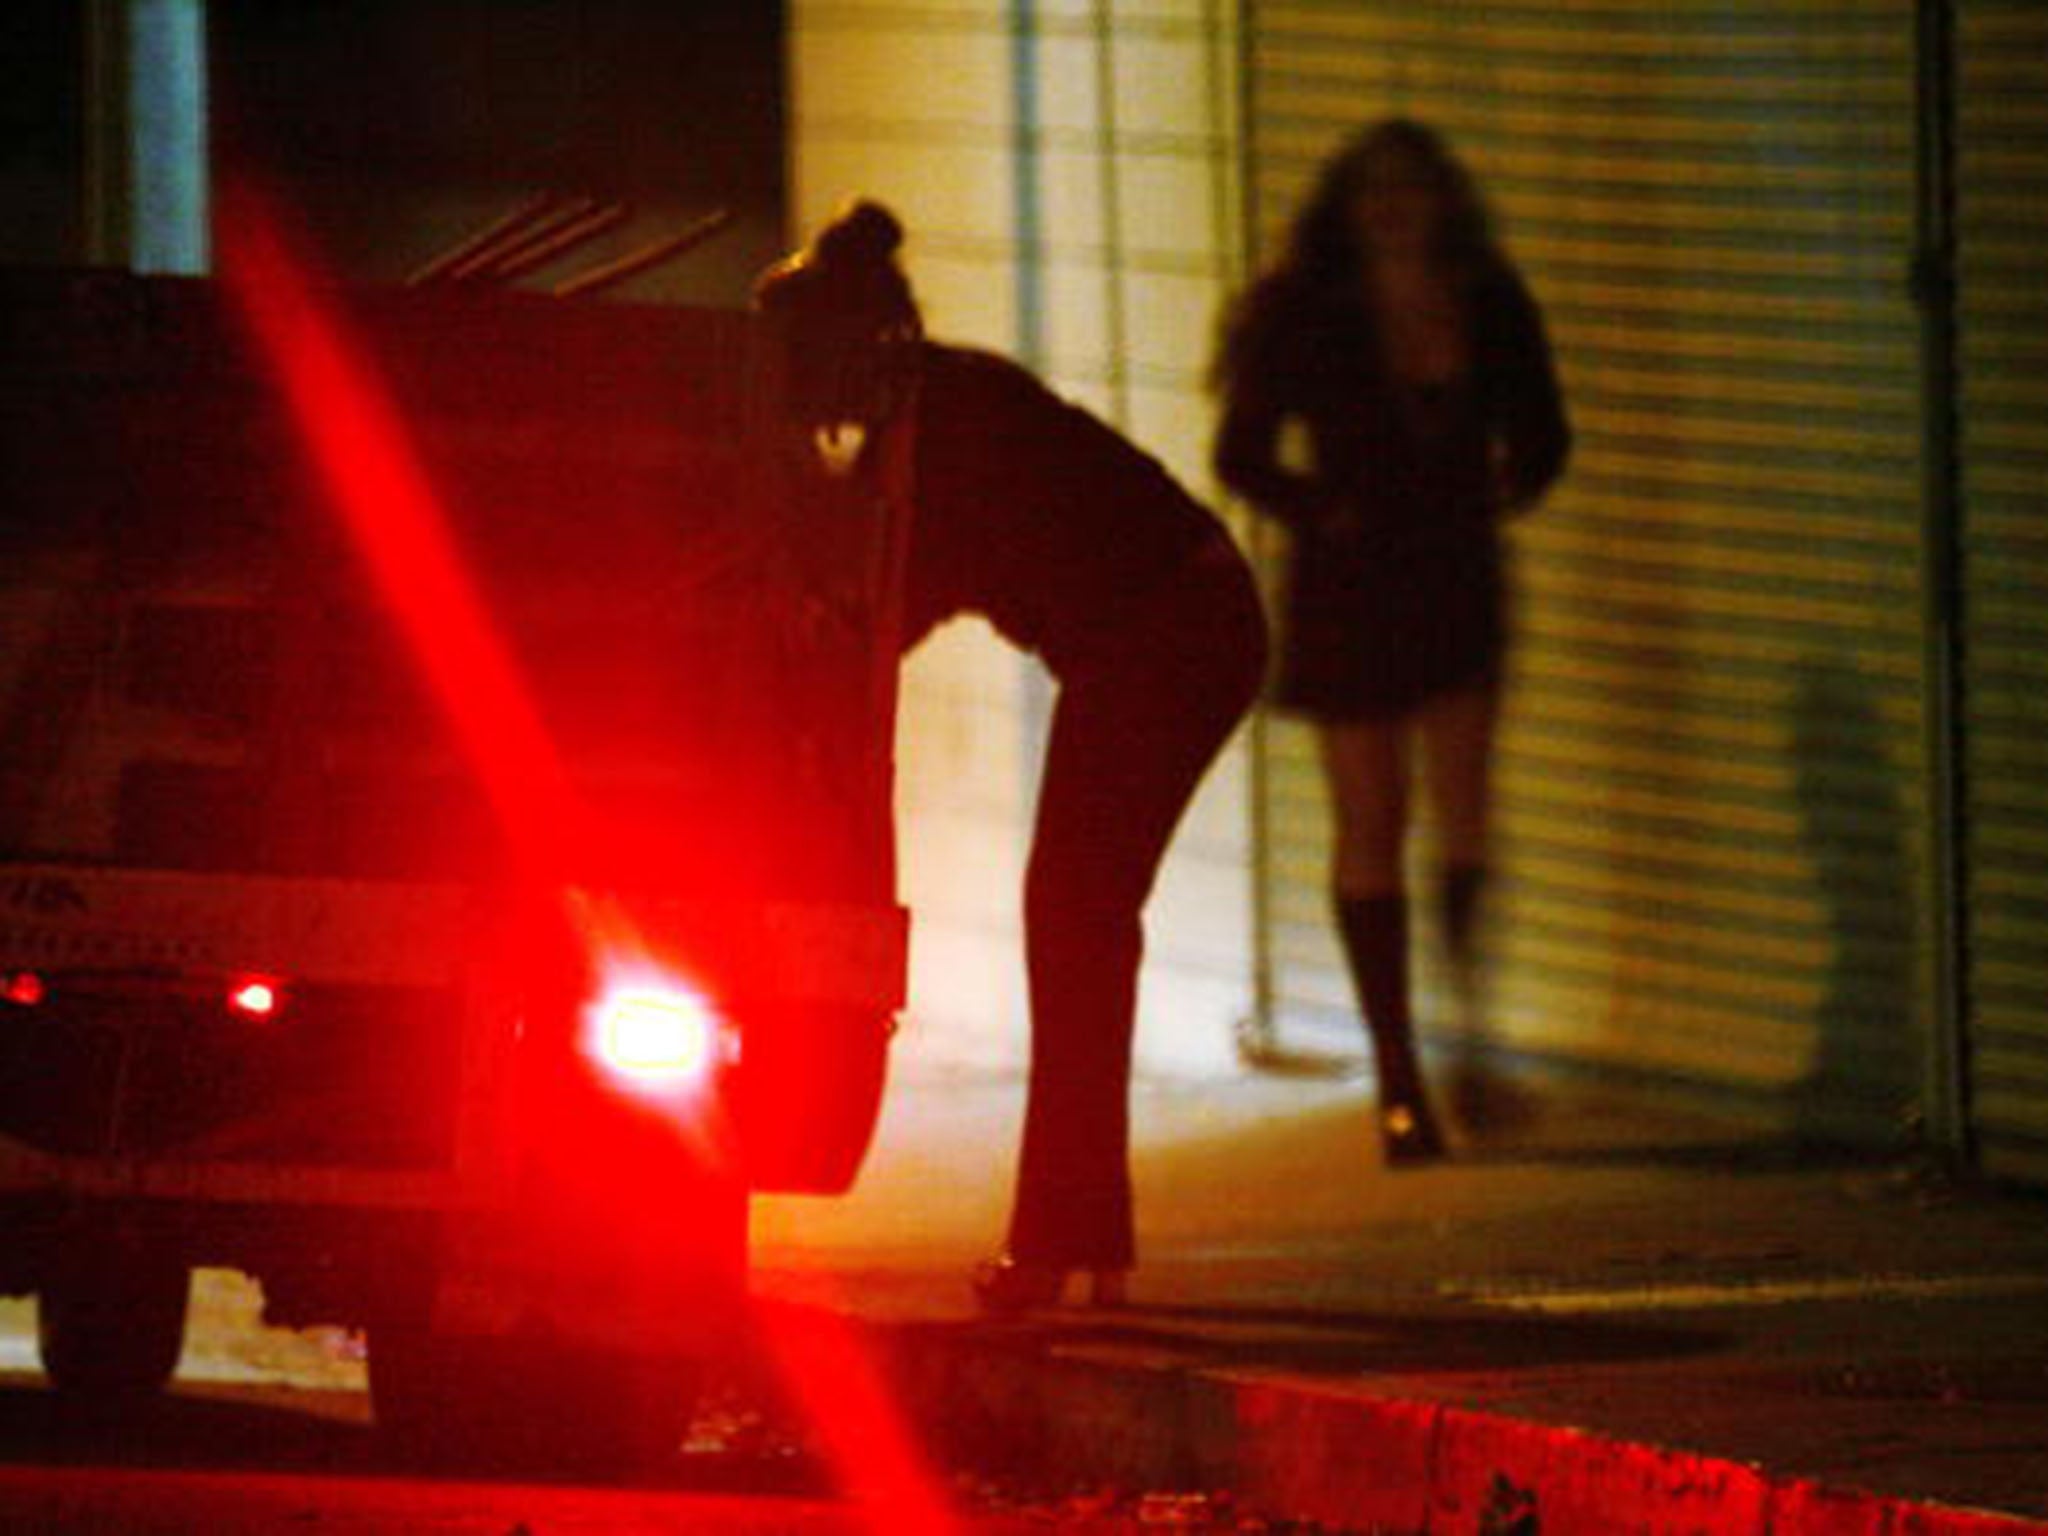 Hull is the first UK city to create a 'prostitute-free zone' in its red light district